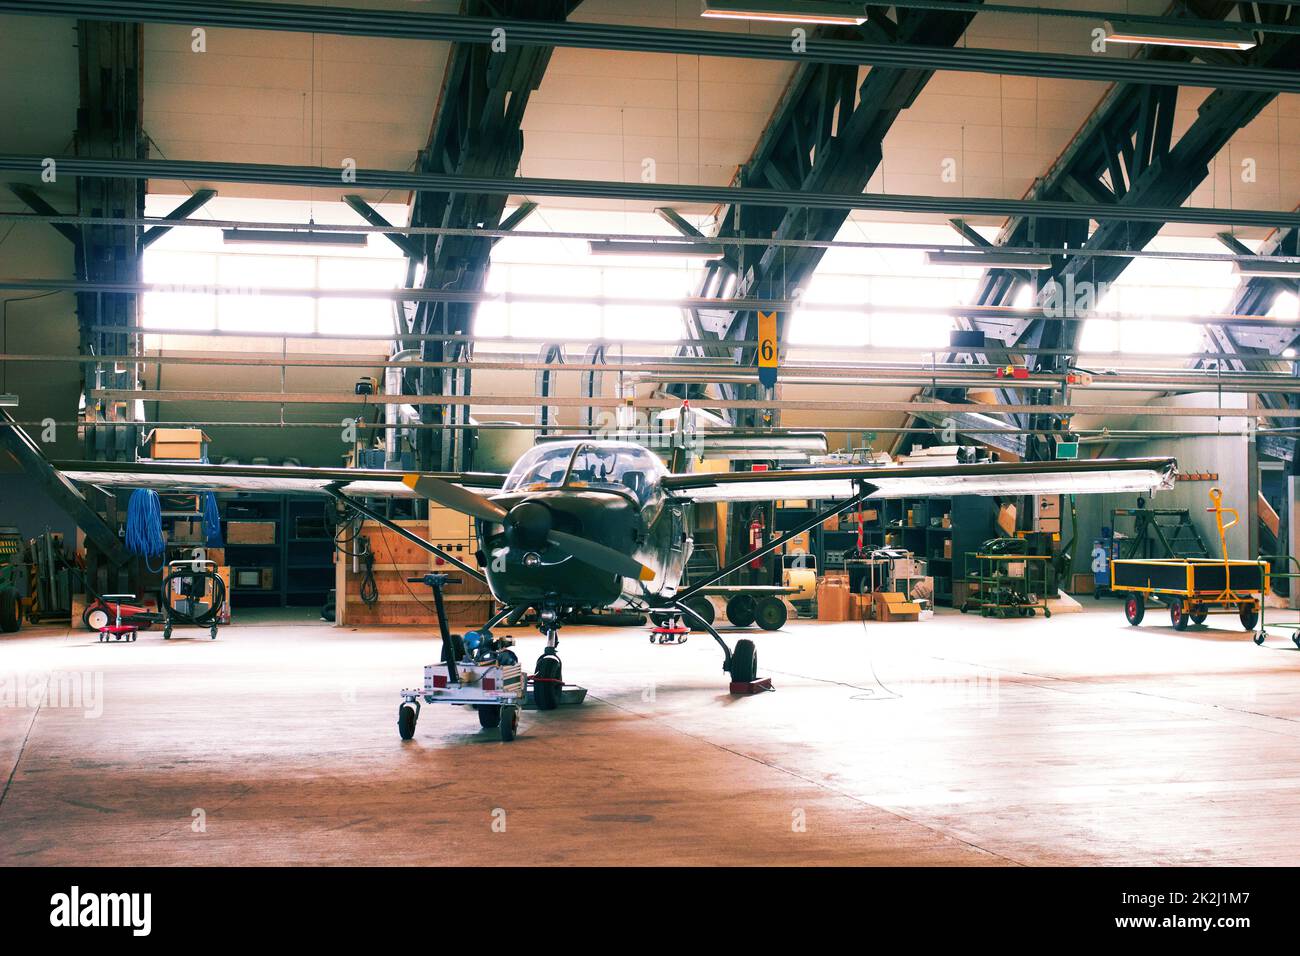 Ready for the next flight. Shot of a light aircraft in a hanger. Stock Photo